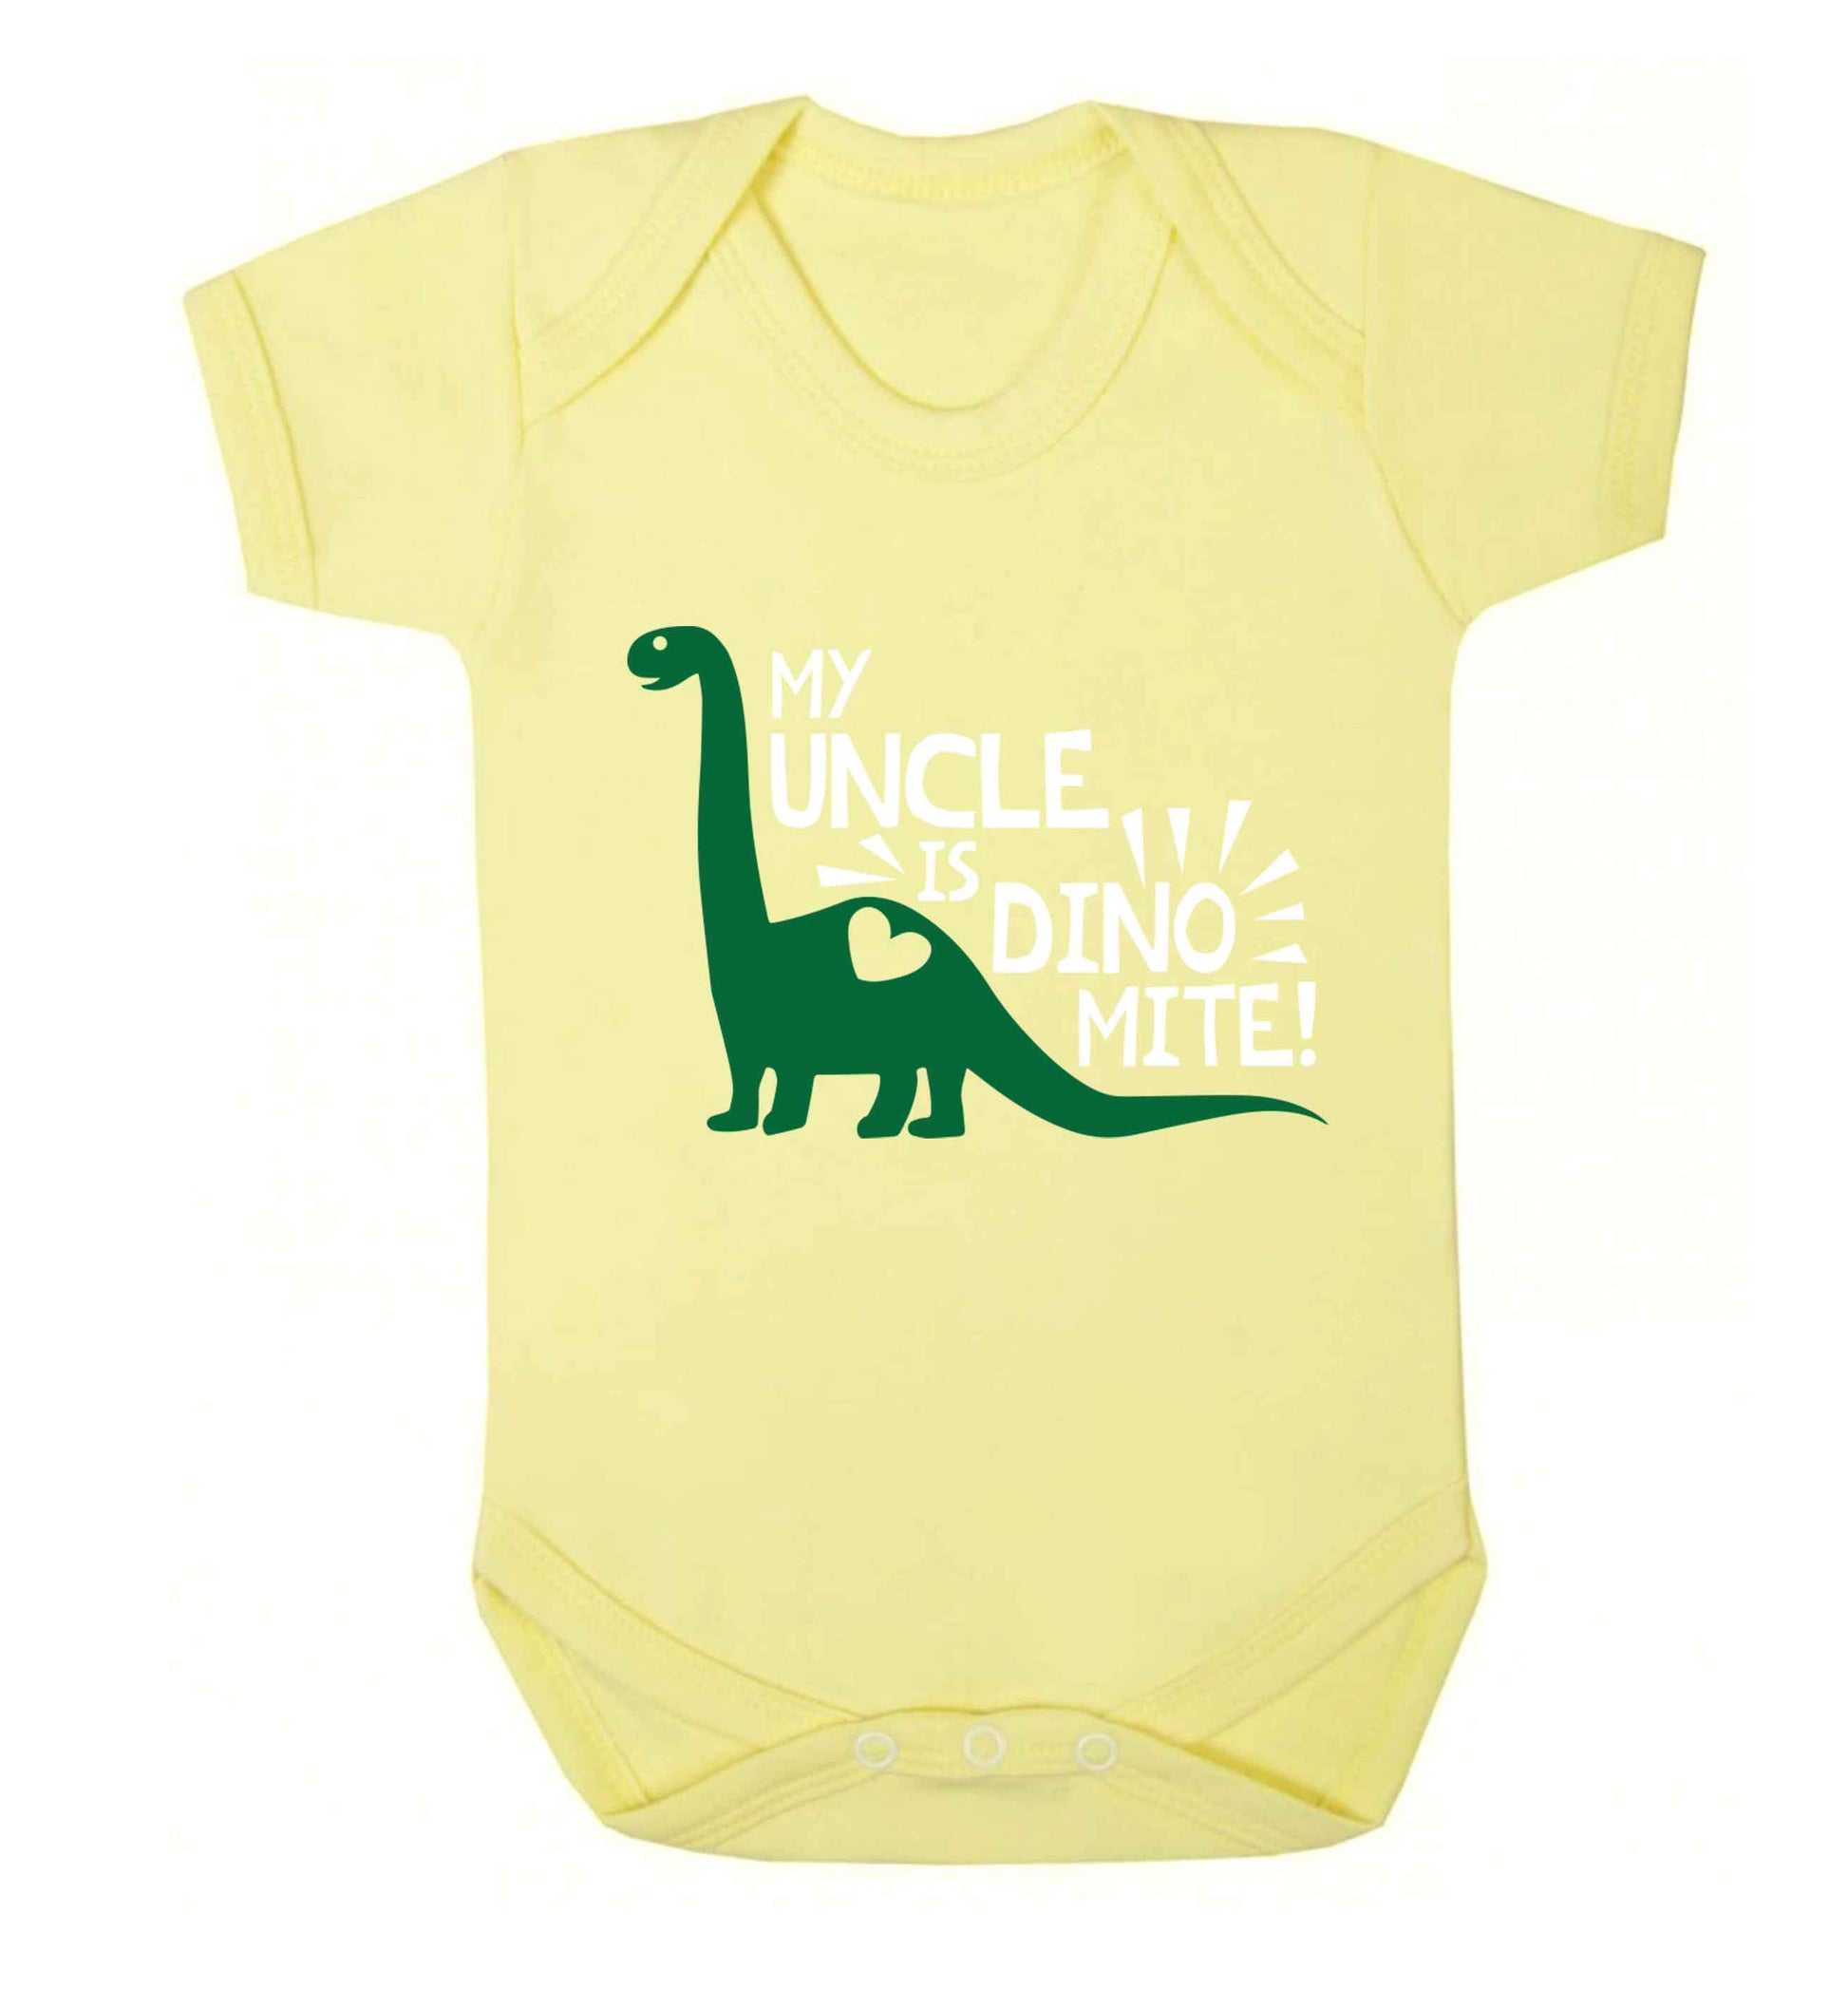 My uncle is dinomite! Baby Vest pale yellow 18-24 months